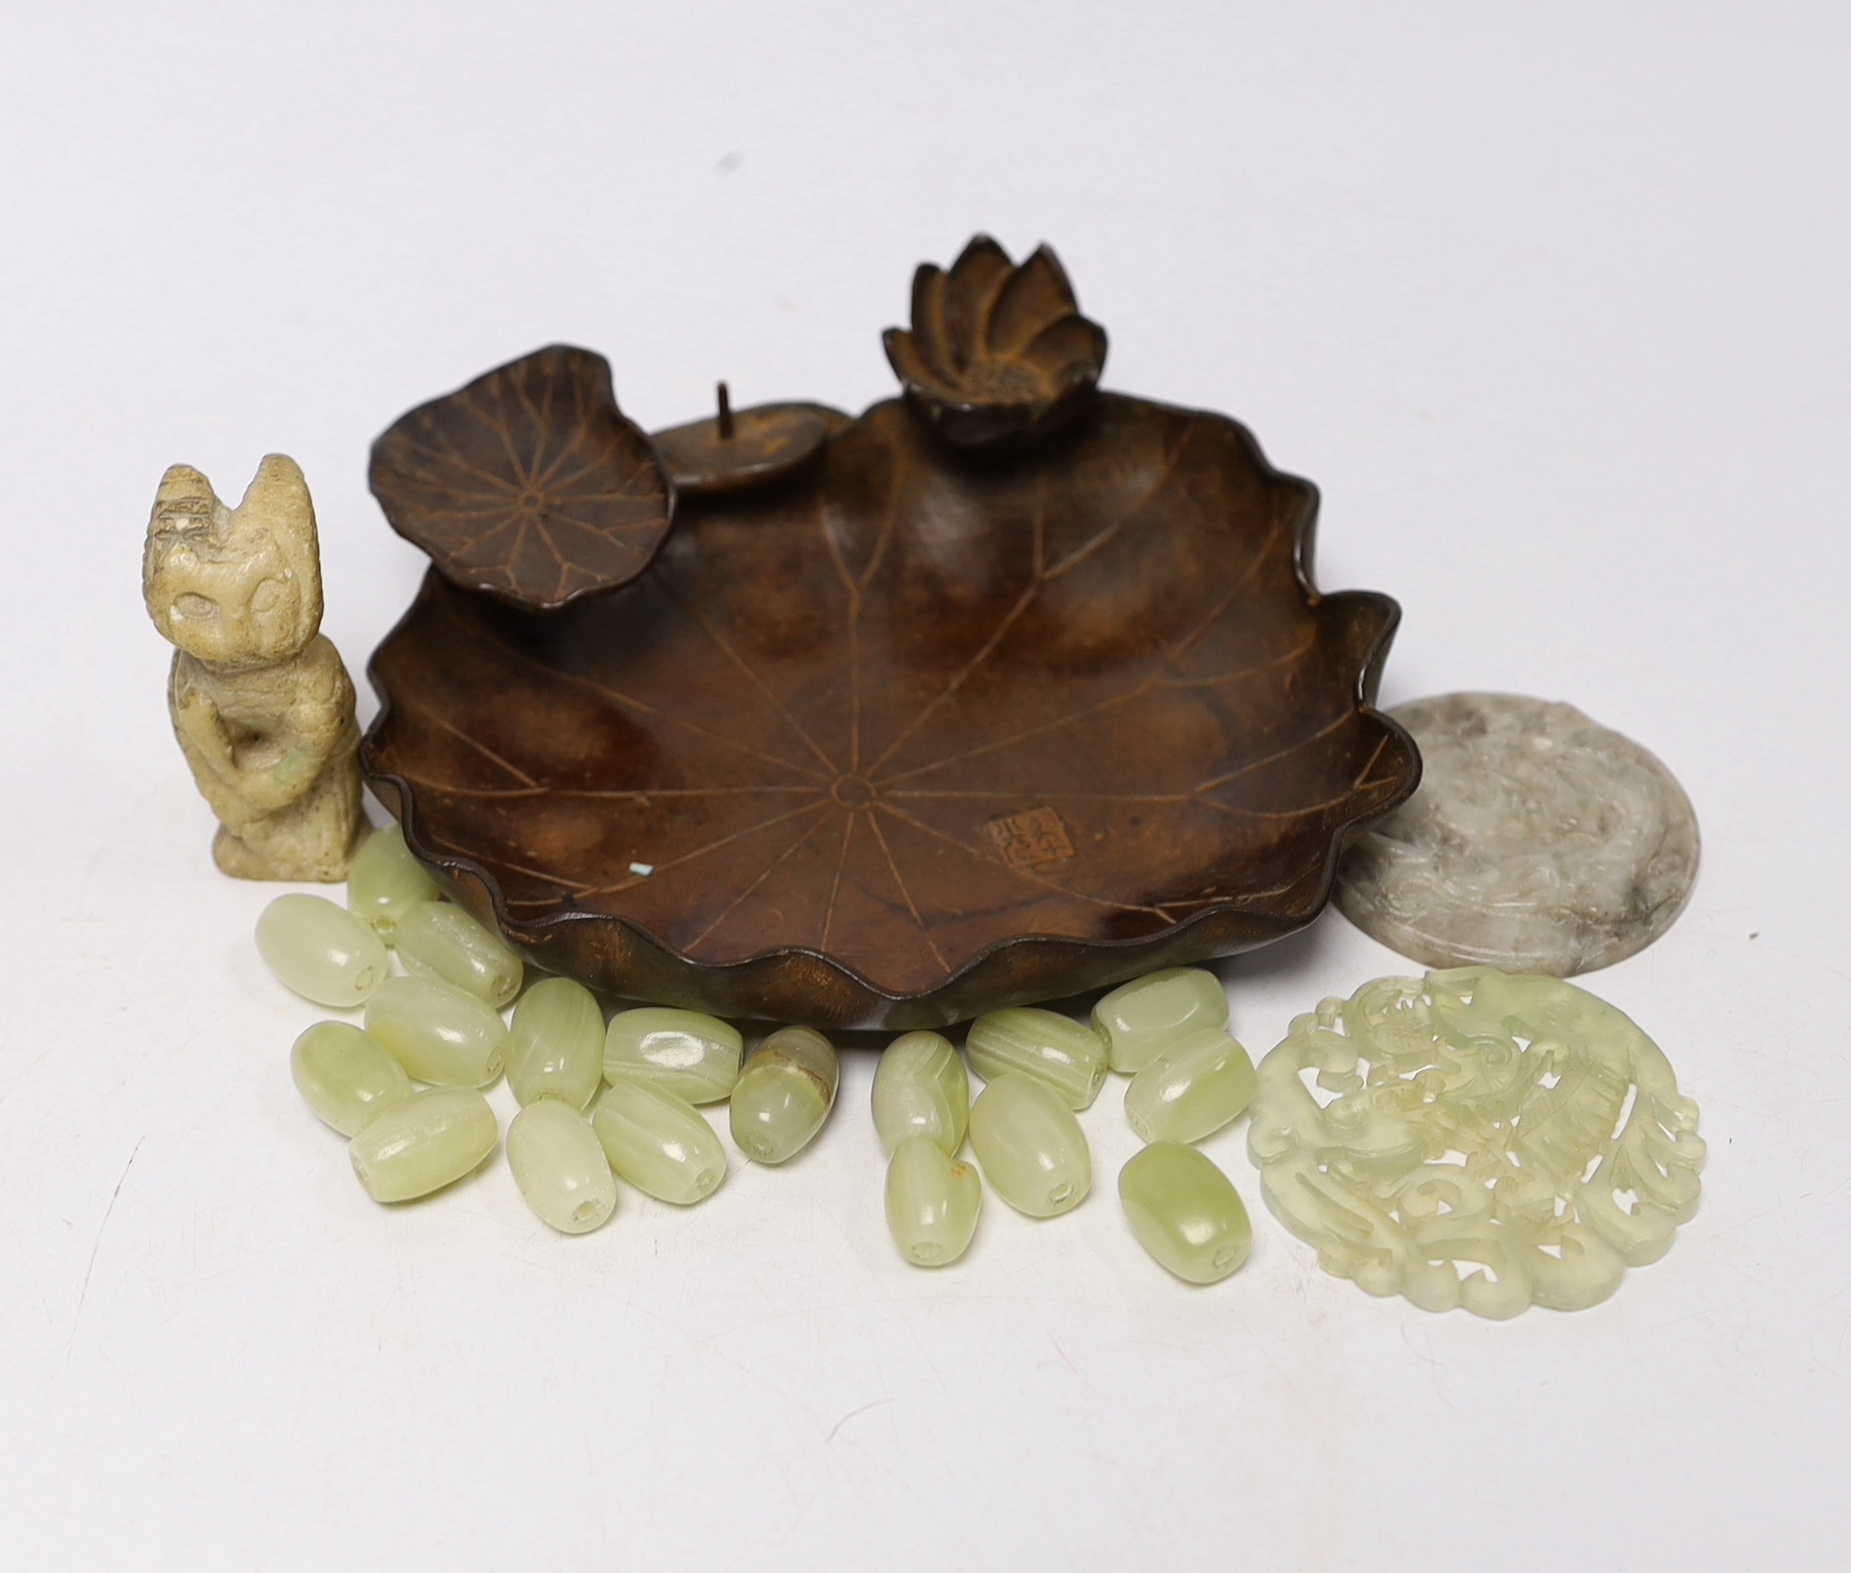 A collection of Chinese items including a bronze tray in the form of a water lily, two bowenite or jadeite discs, a soapstone cat and a bag of hardstone beads, bronze 14cm diameter